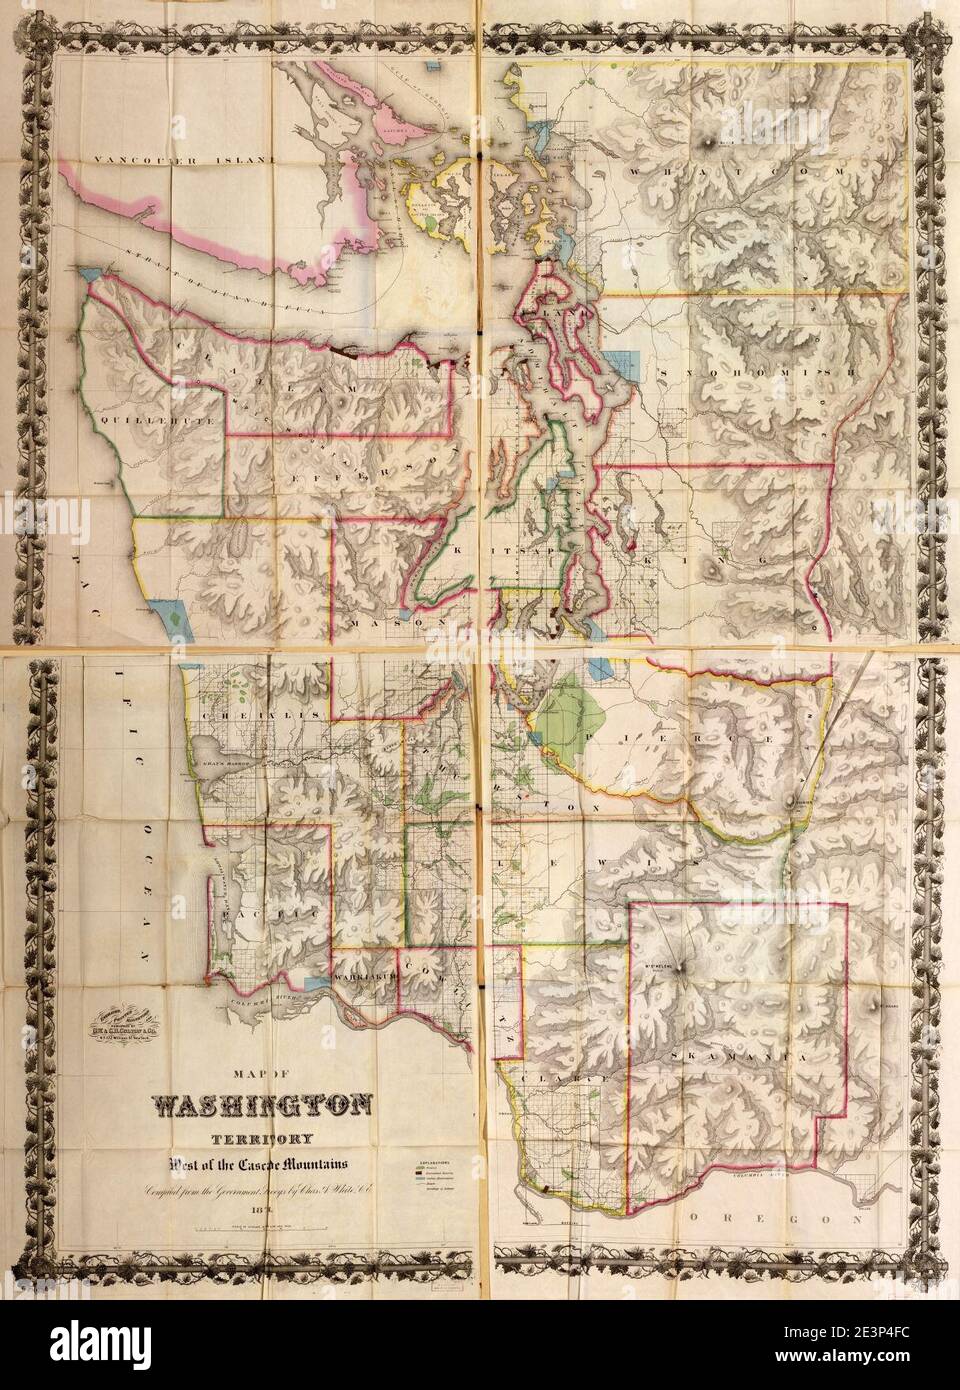 Map Of The Washington Territory West Of The Cascade Mountains 2E3P4FC 